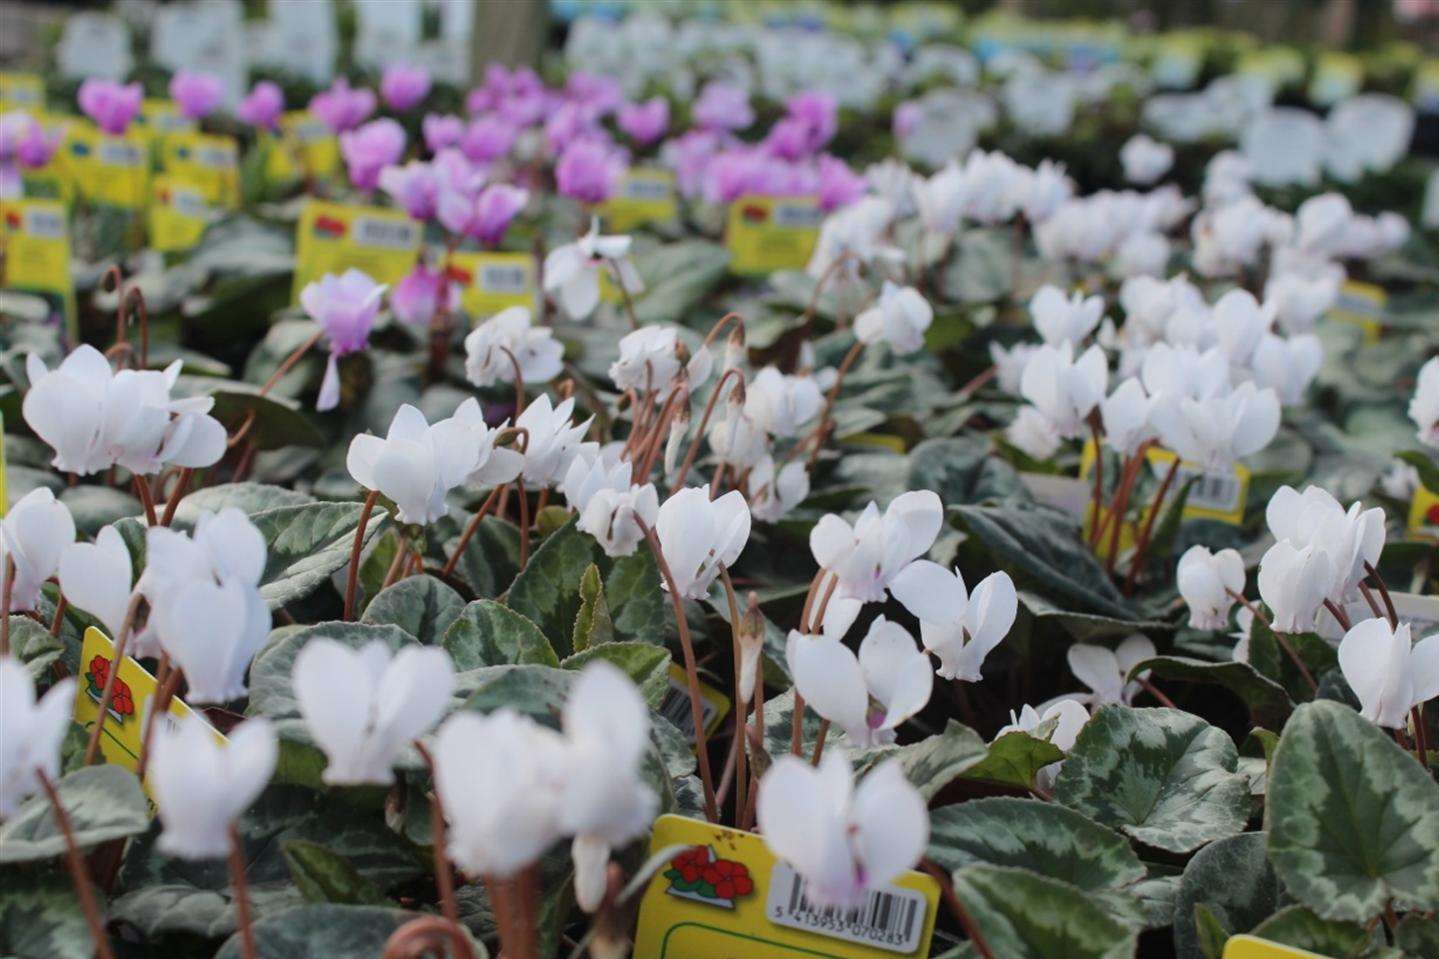 Cyclamen will bloom until the first frosts